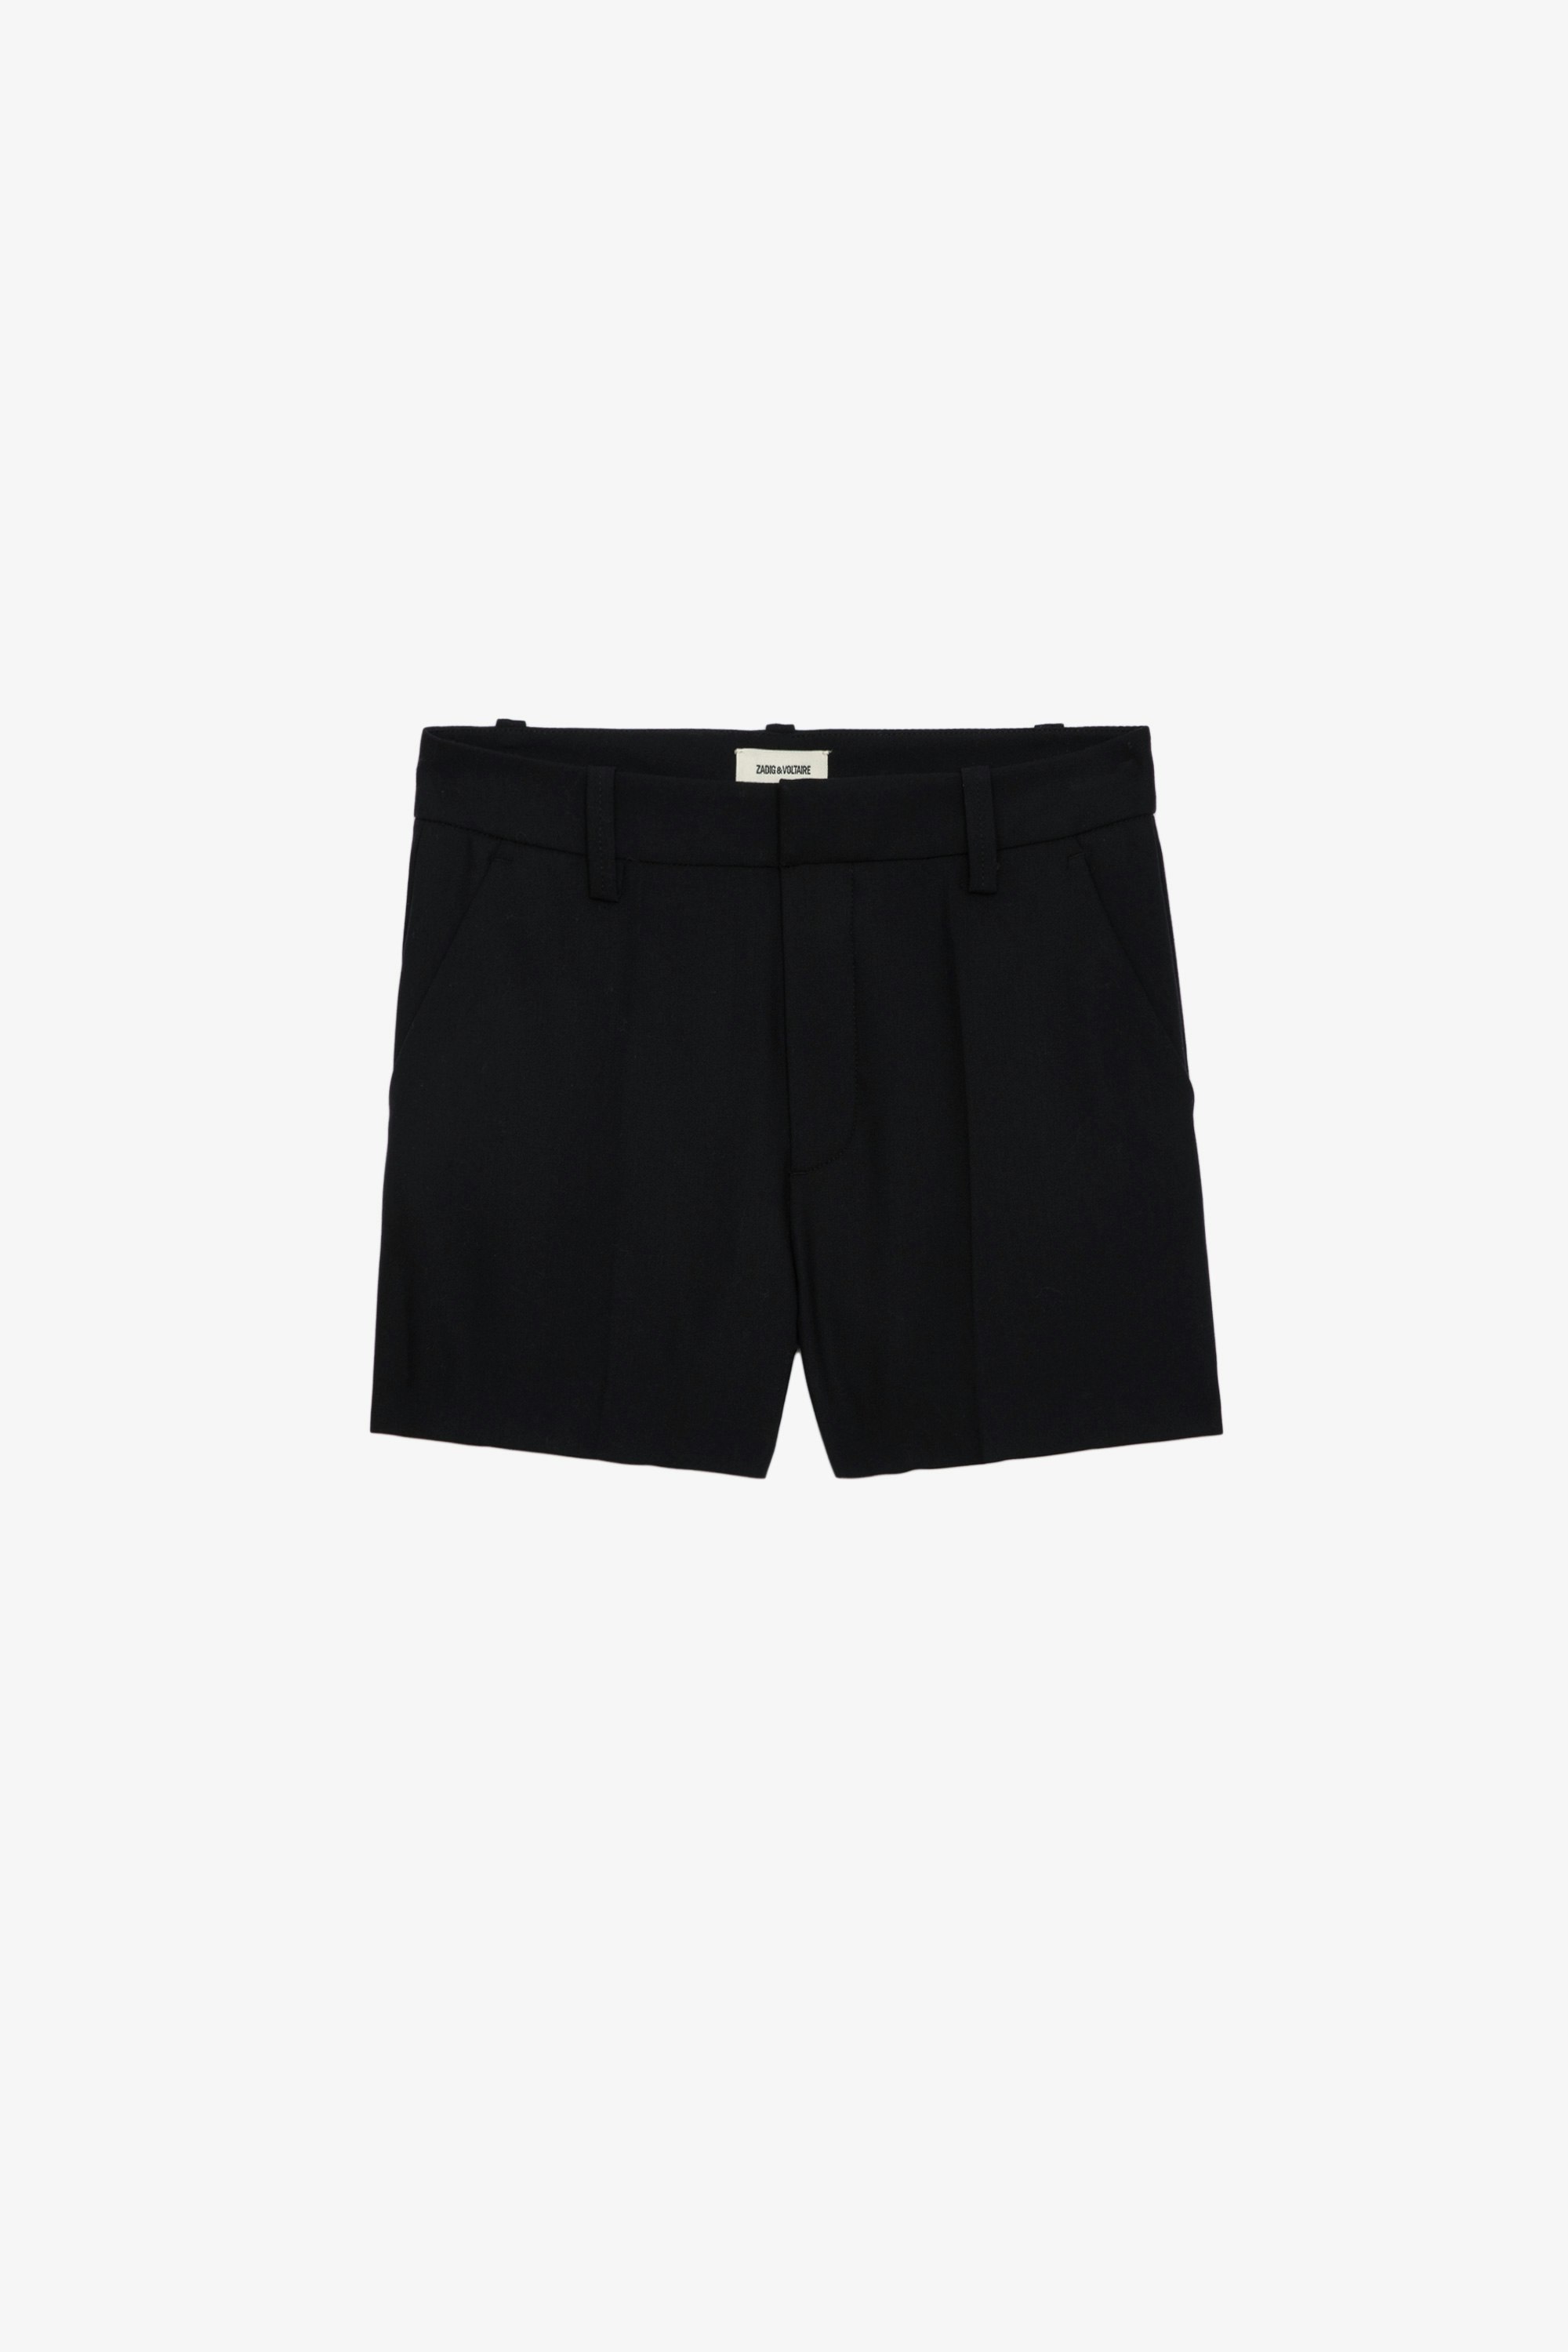 Pink Shorts - Black tailored shorts with pockets.